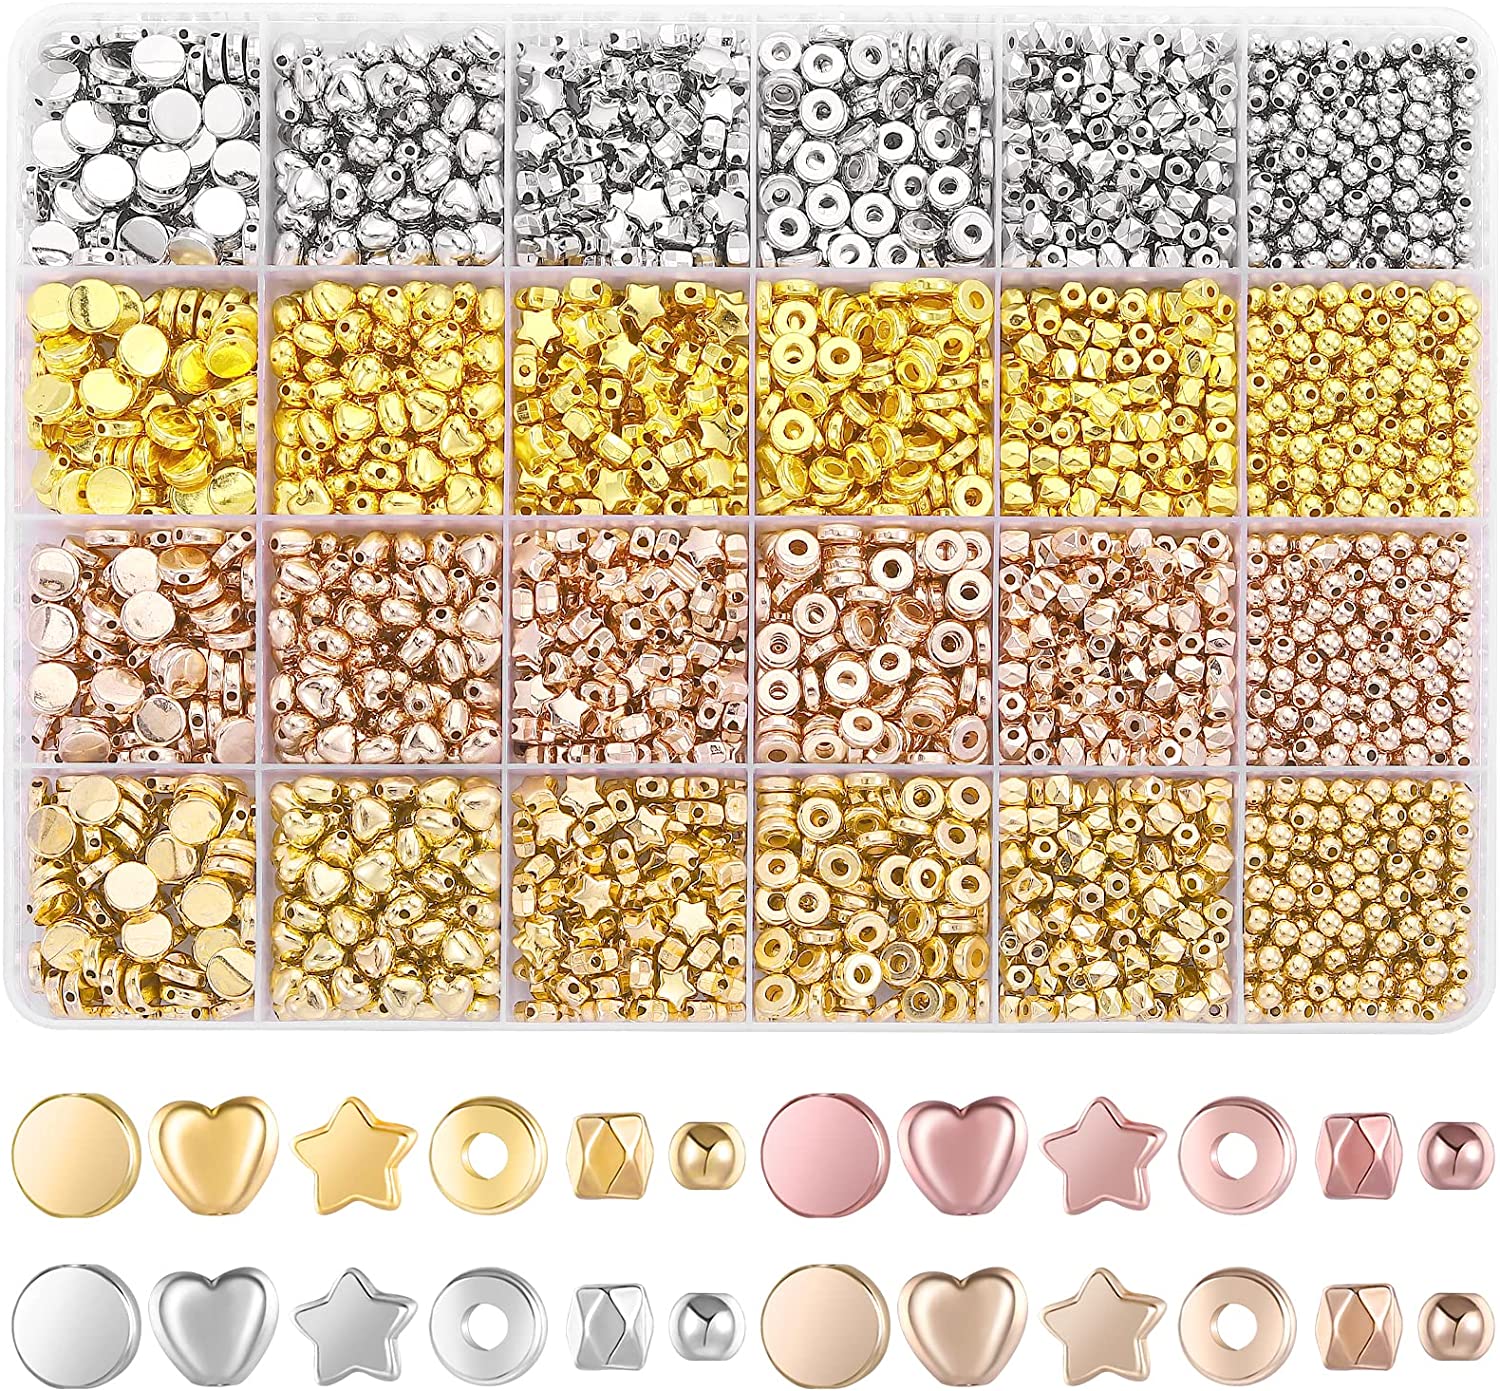 3600 Pieces Gold Spacer Beads for Bracelets Necklaces Jewelry Making,  Bracelet Beads, Round Beads and Star Beads-(Gold, Sliver, Rose Gold, KC